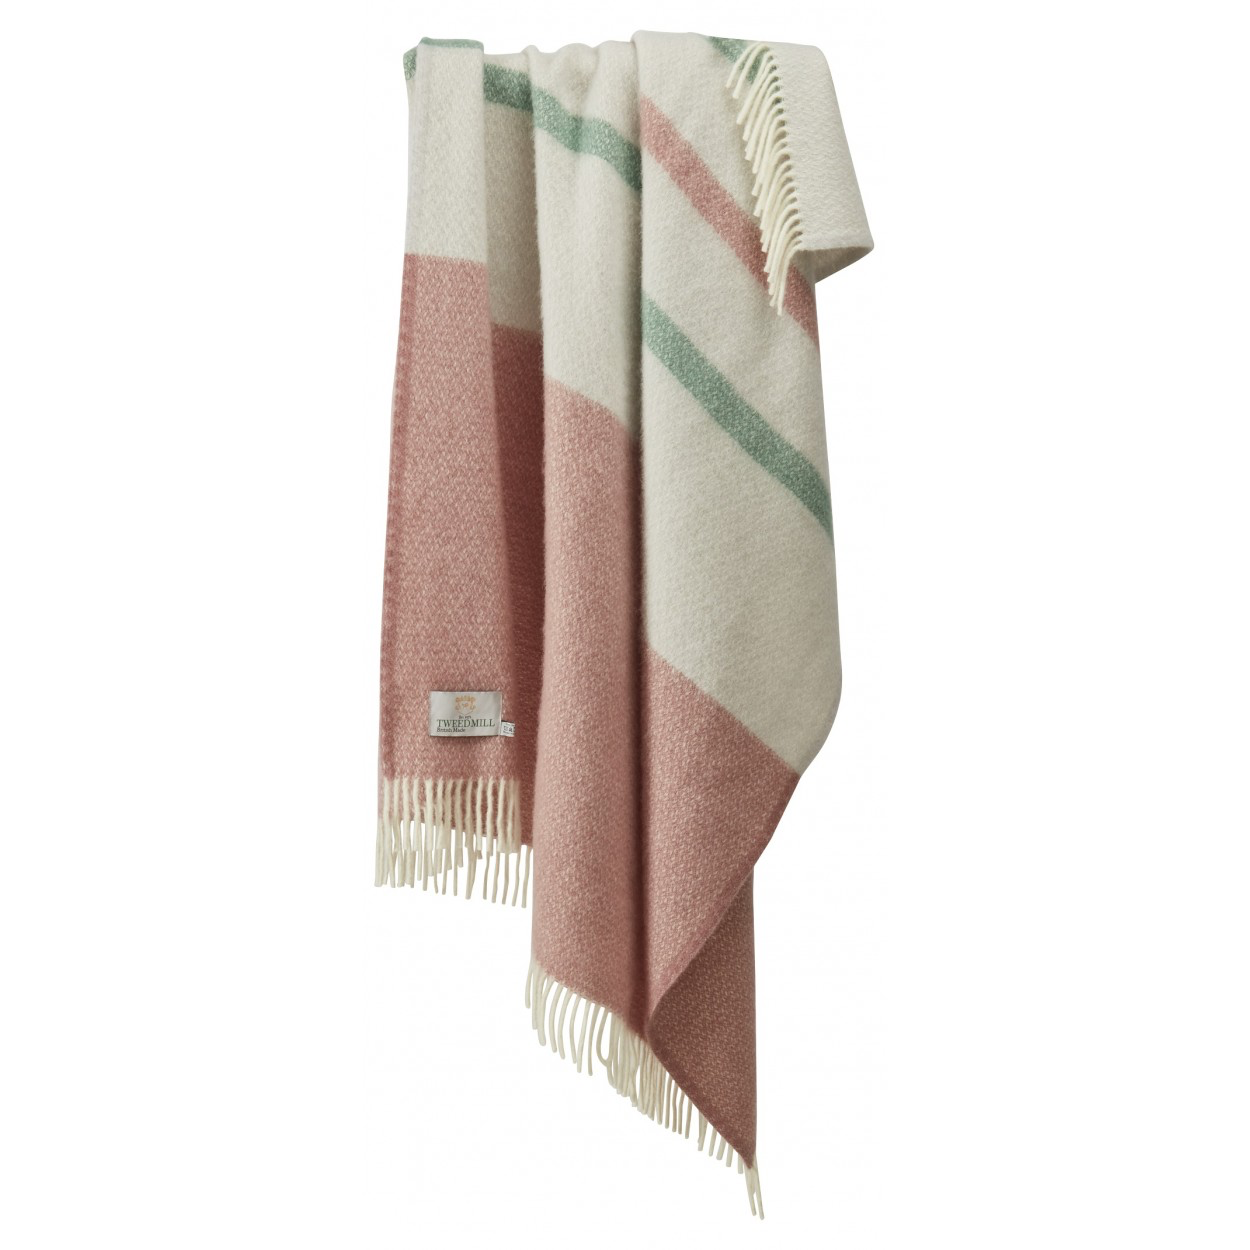 Dusty pink & Sea green striped throw. Pure wool